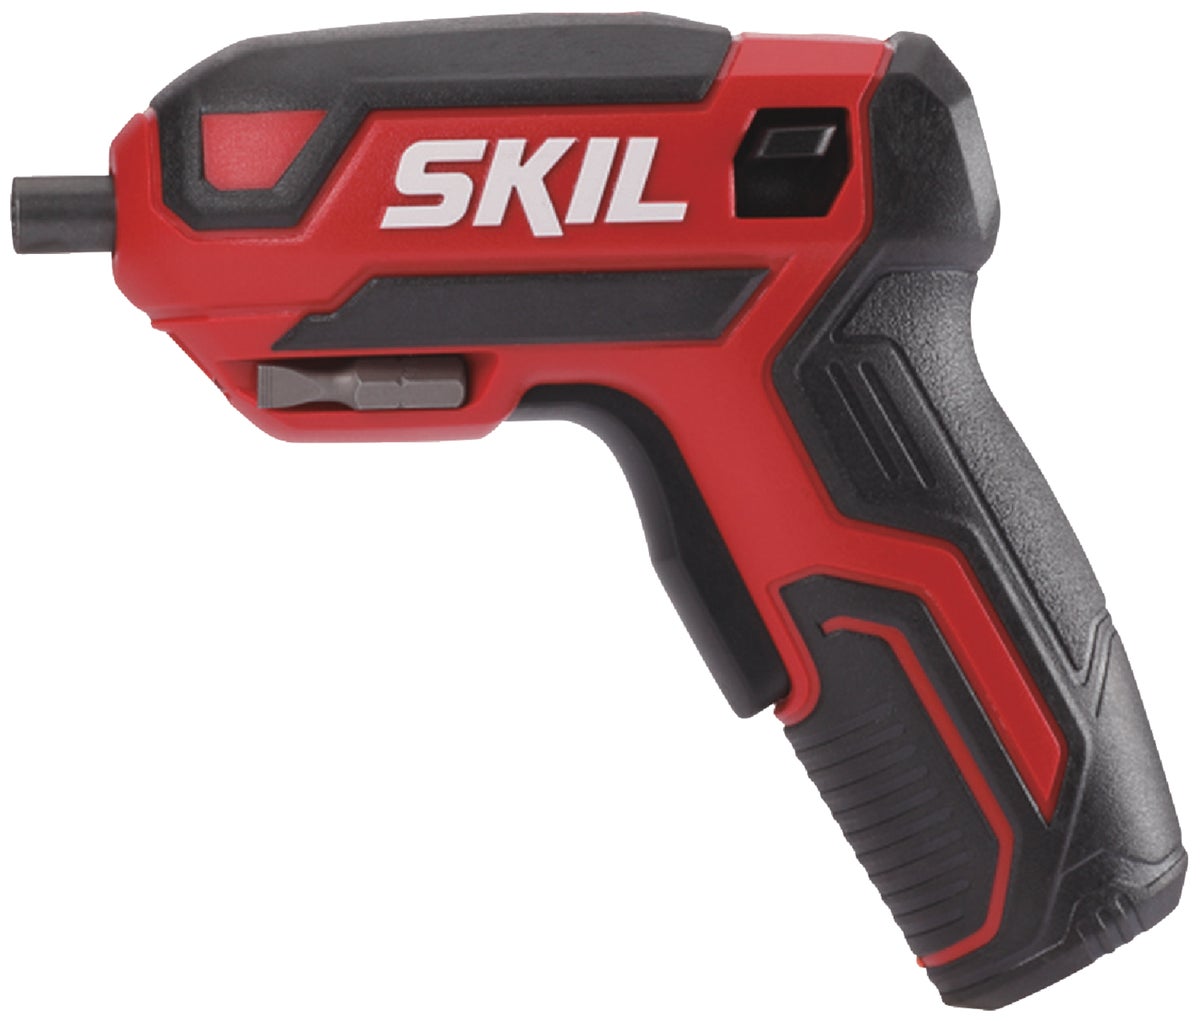 SKIL 4V Rechargeable Cordless Screwdriver